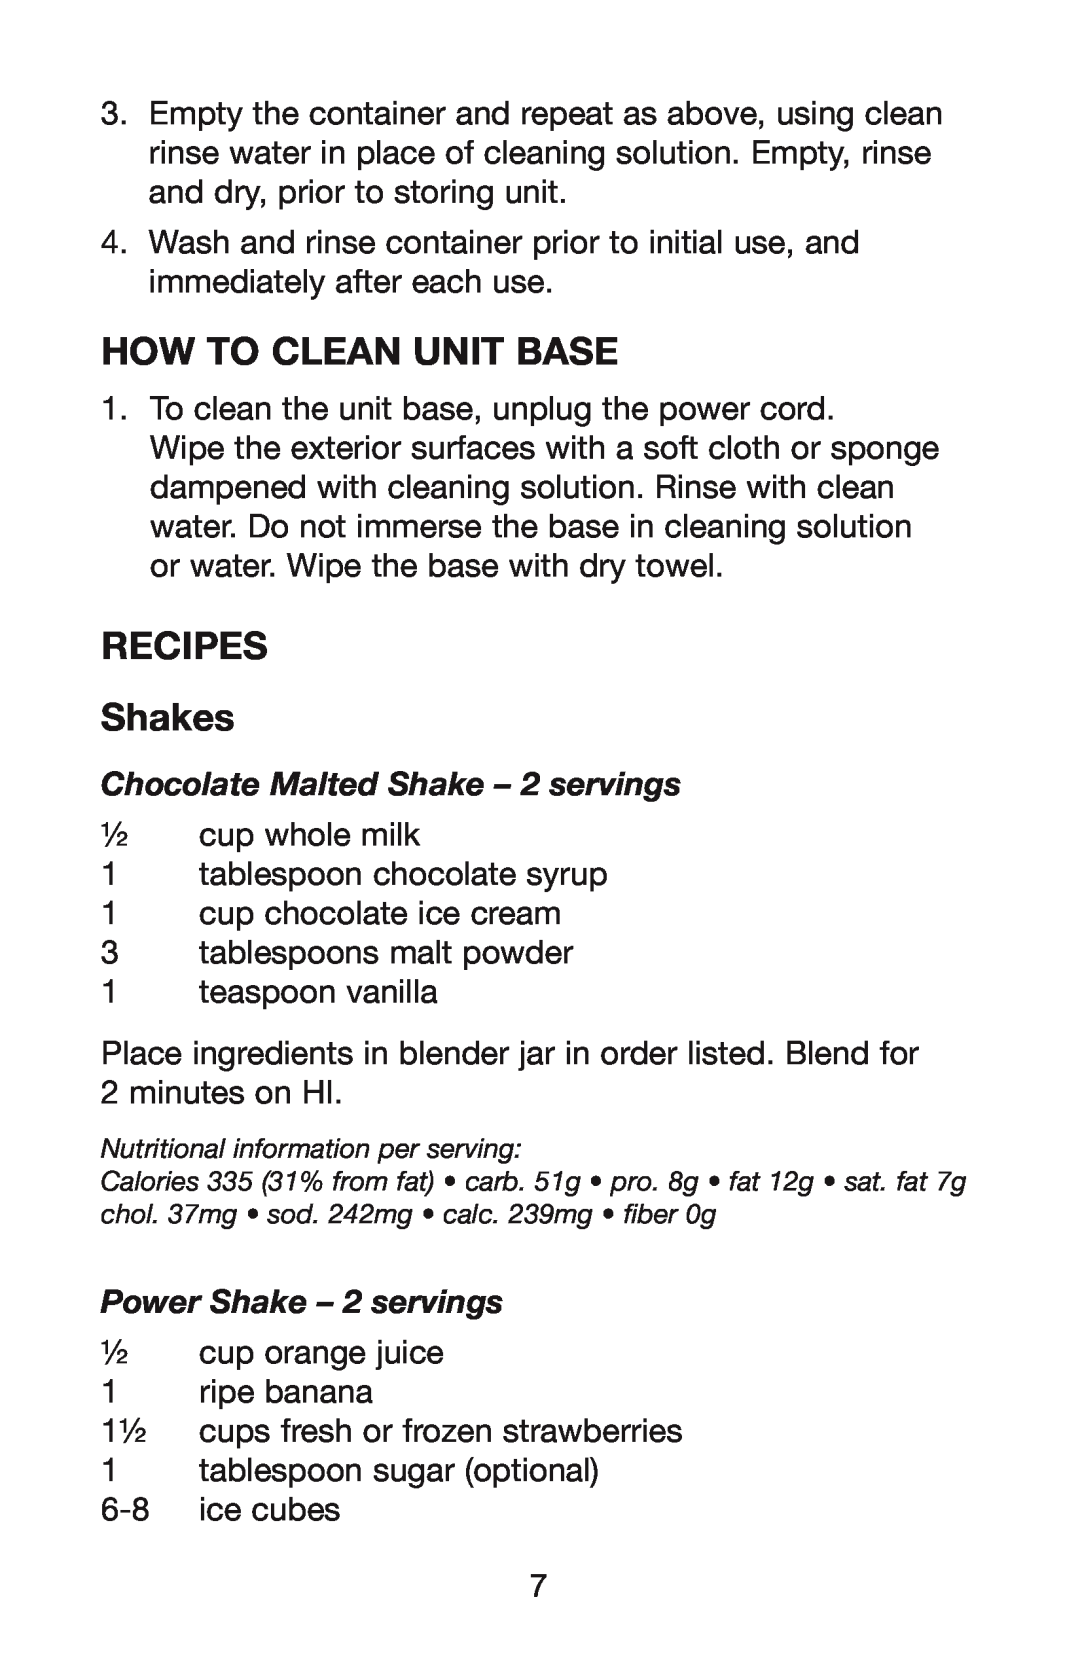 Waring MBB, WPB, PBB How To Clean unit Base, Recipes Shakes, Chocolate Malted Shake - 2 servings, Power Shake - 2 servings 